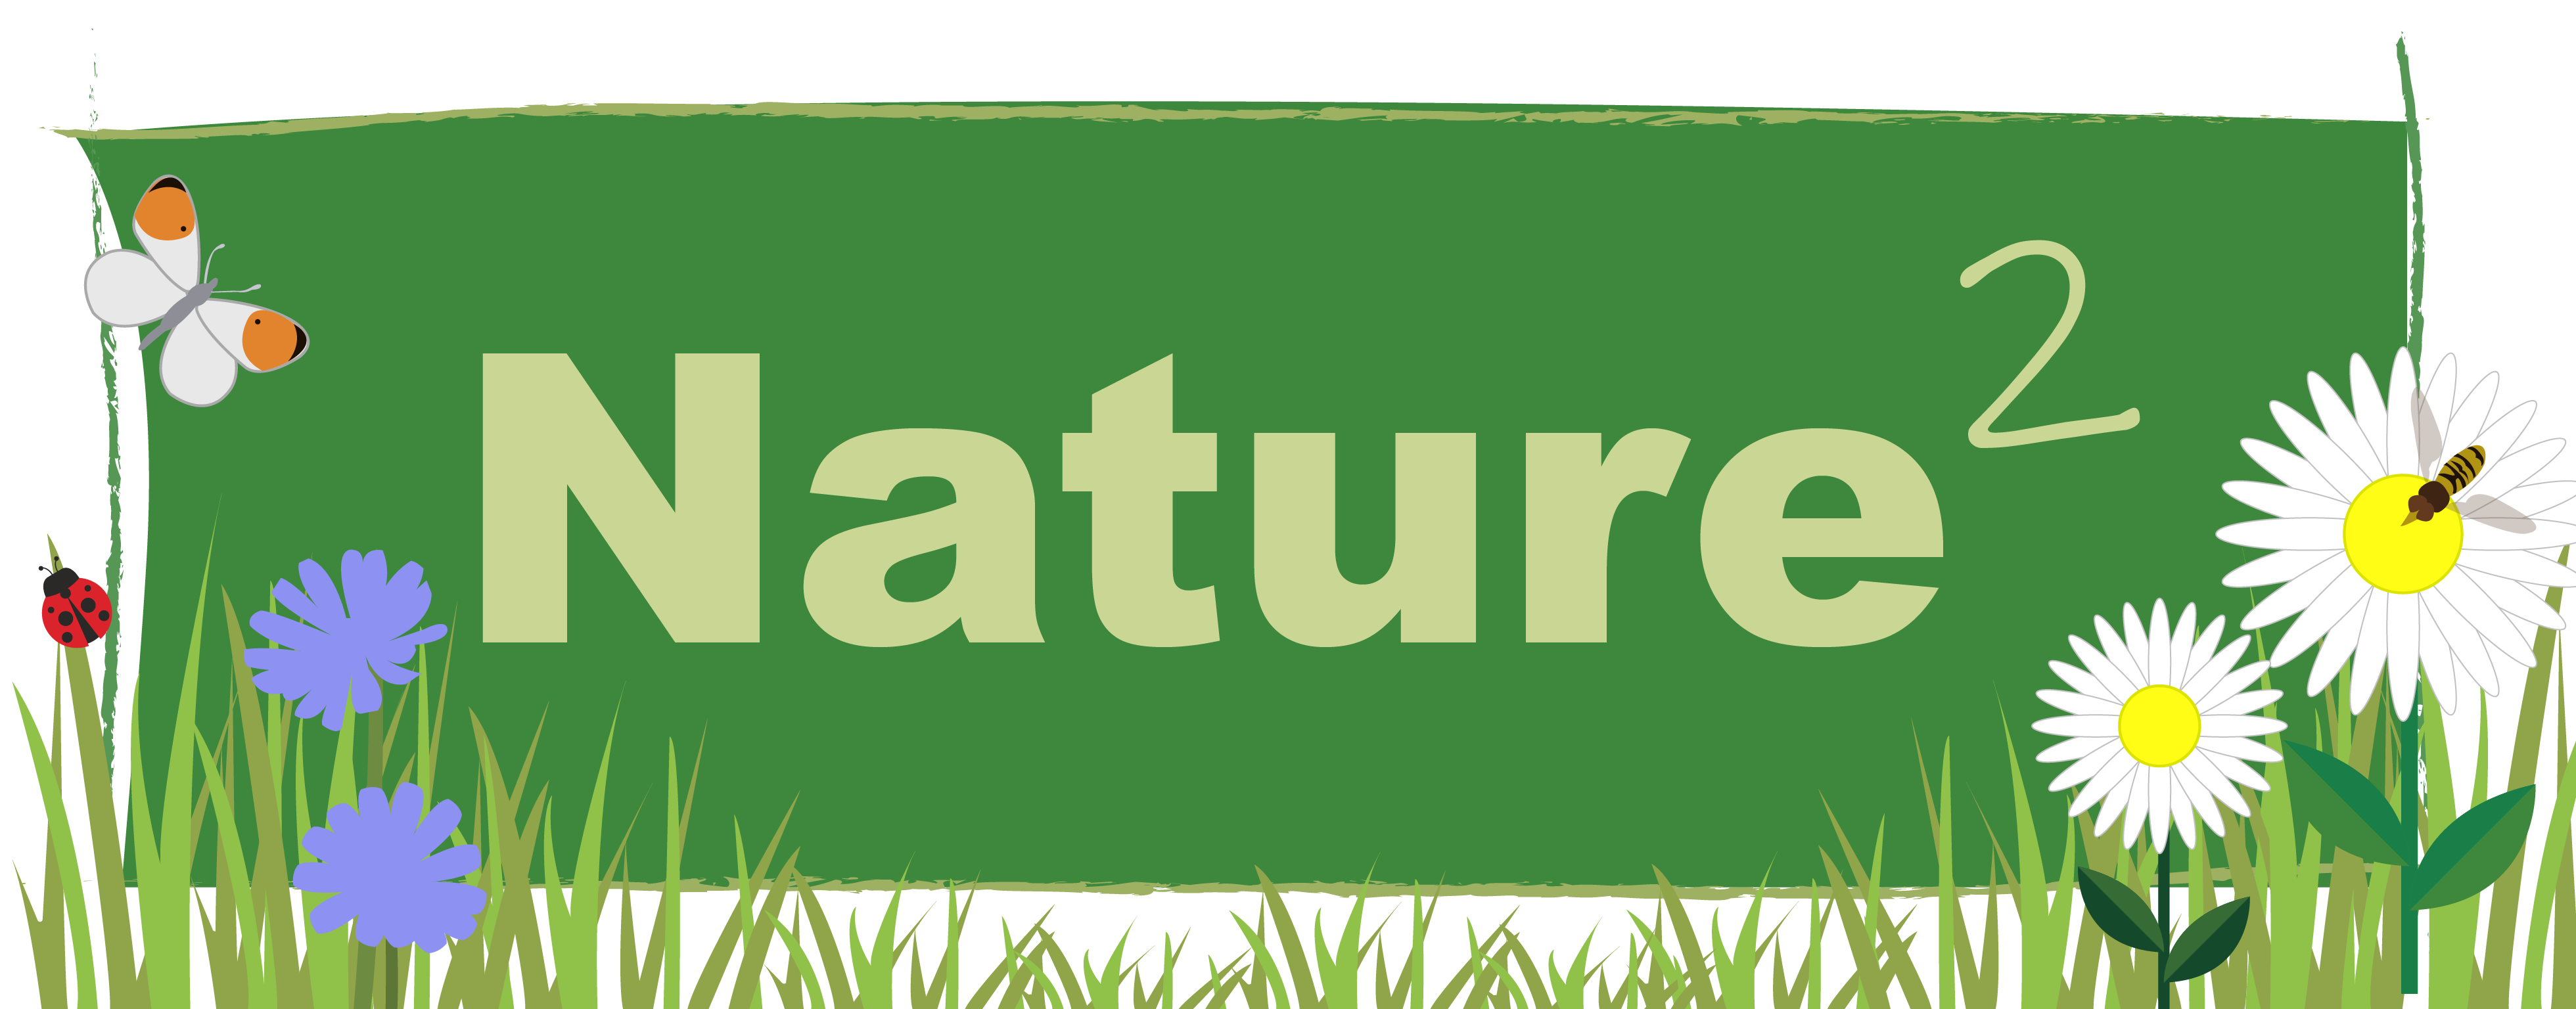 Nature Squared banner